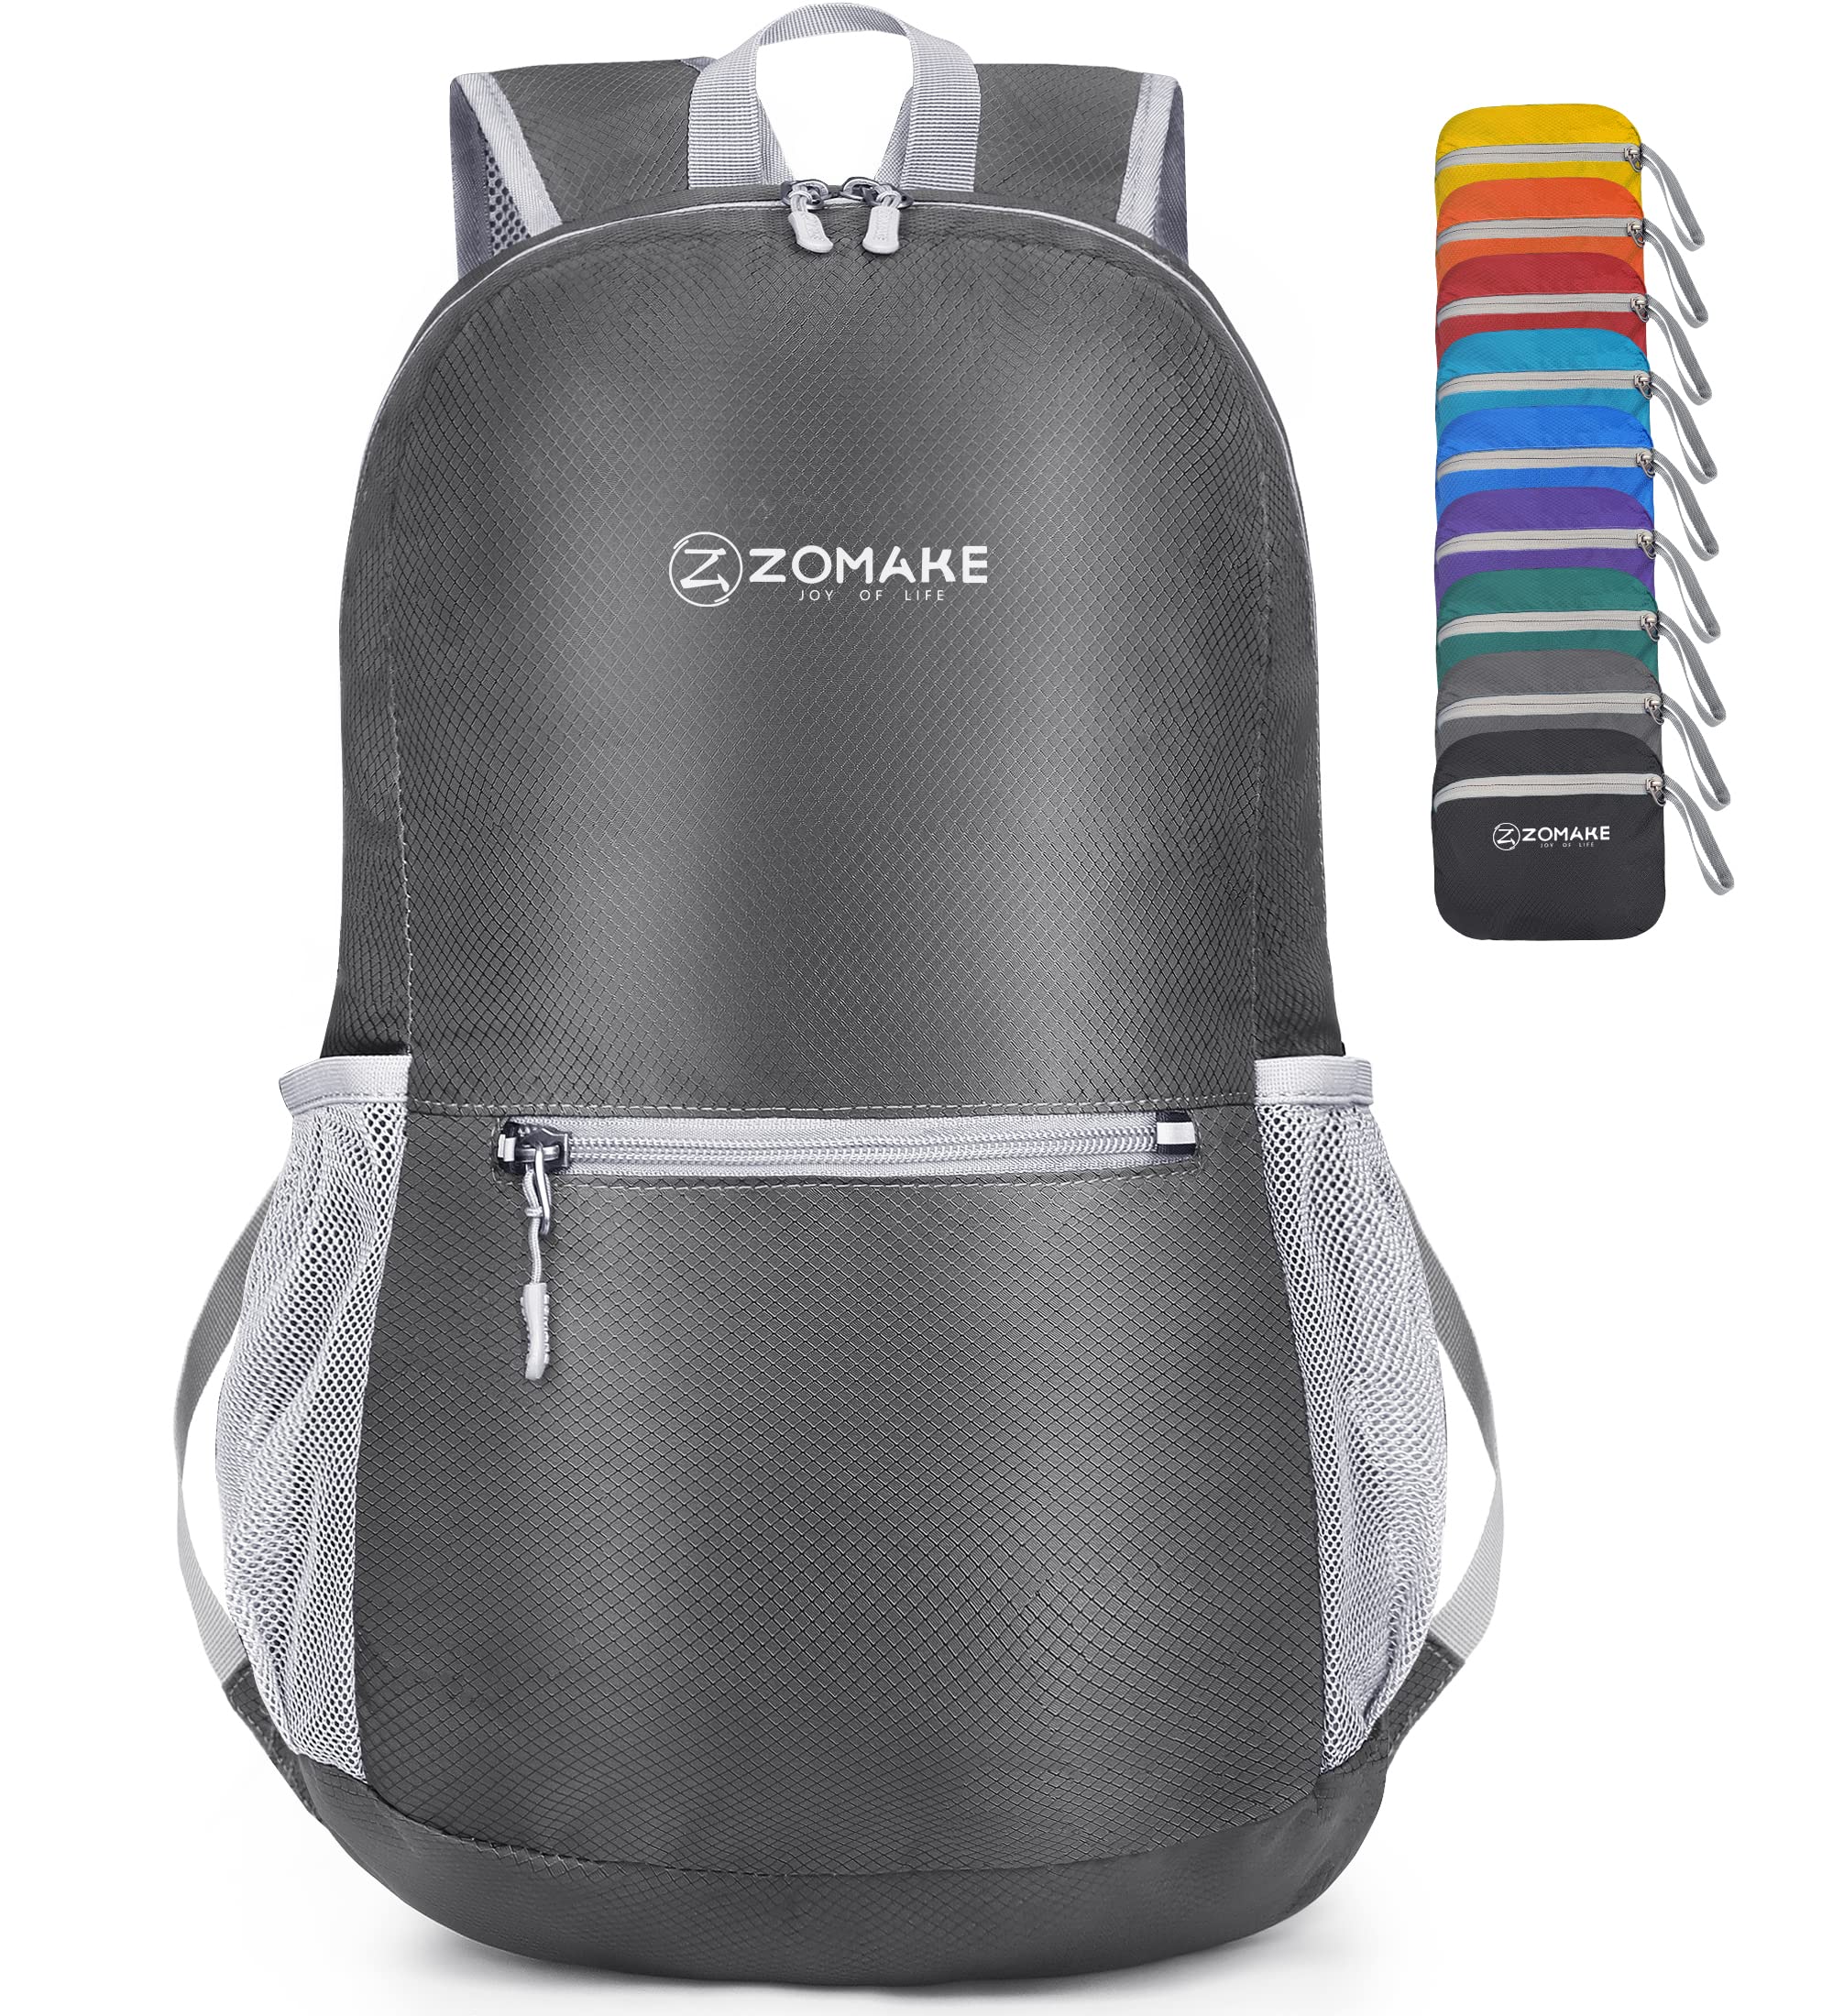 ZOMAKE Ultra Lightweight Hiking Backpack 20L - Water Resistant Small Backpack Packable Daypack for Women Men(Medium Grey)